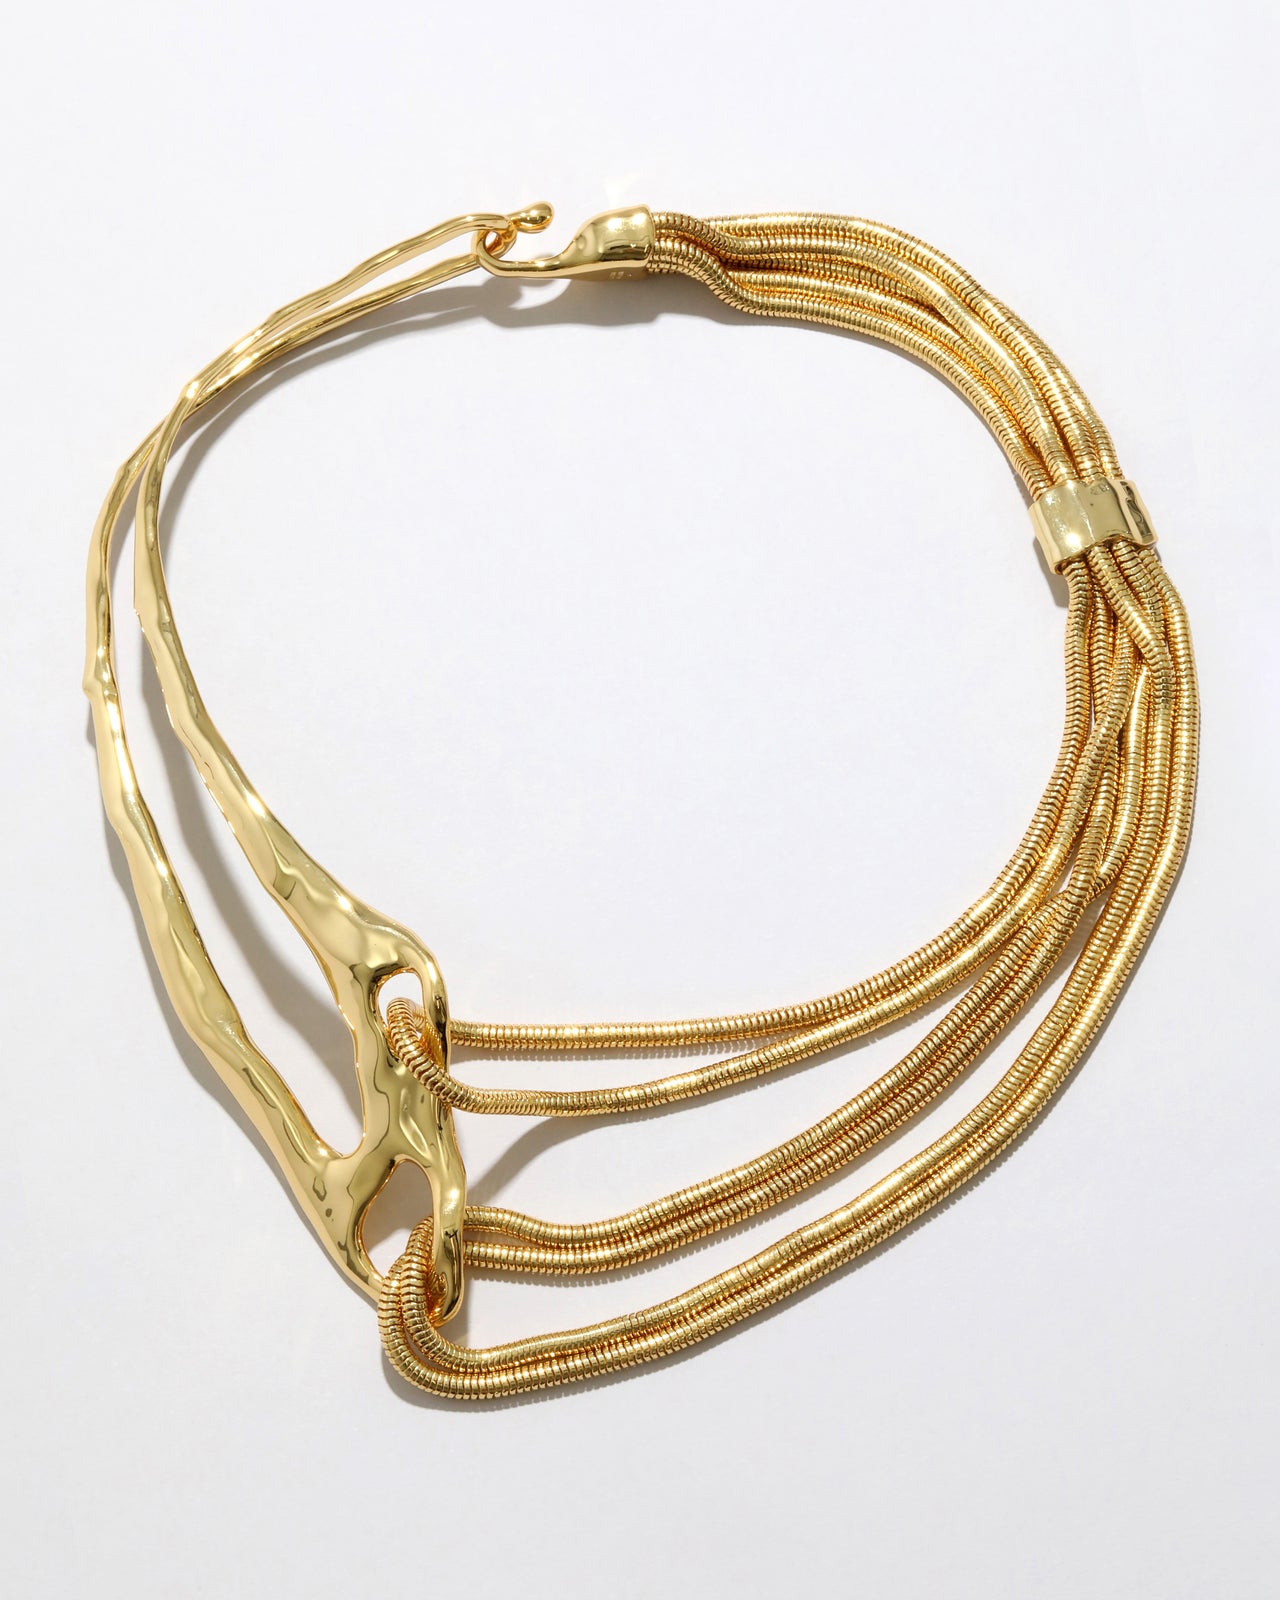 Molten Gold Intertwined Snake Chain Necklace - Photo 2